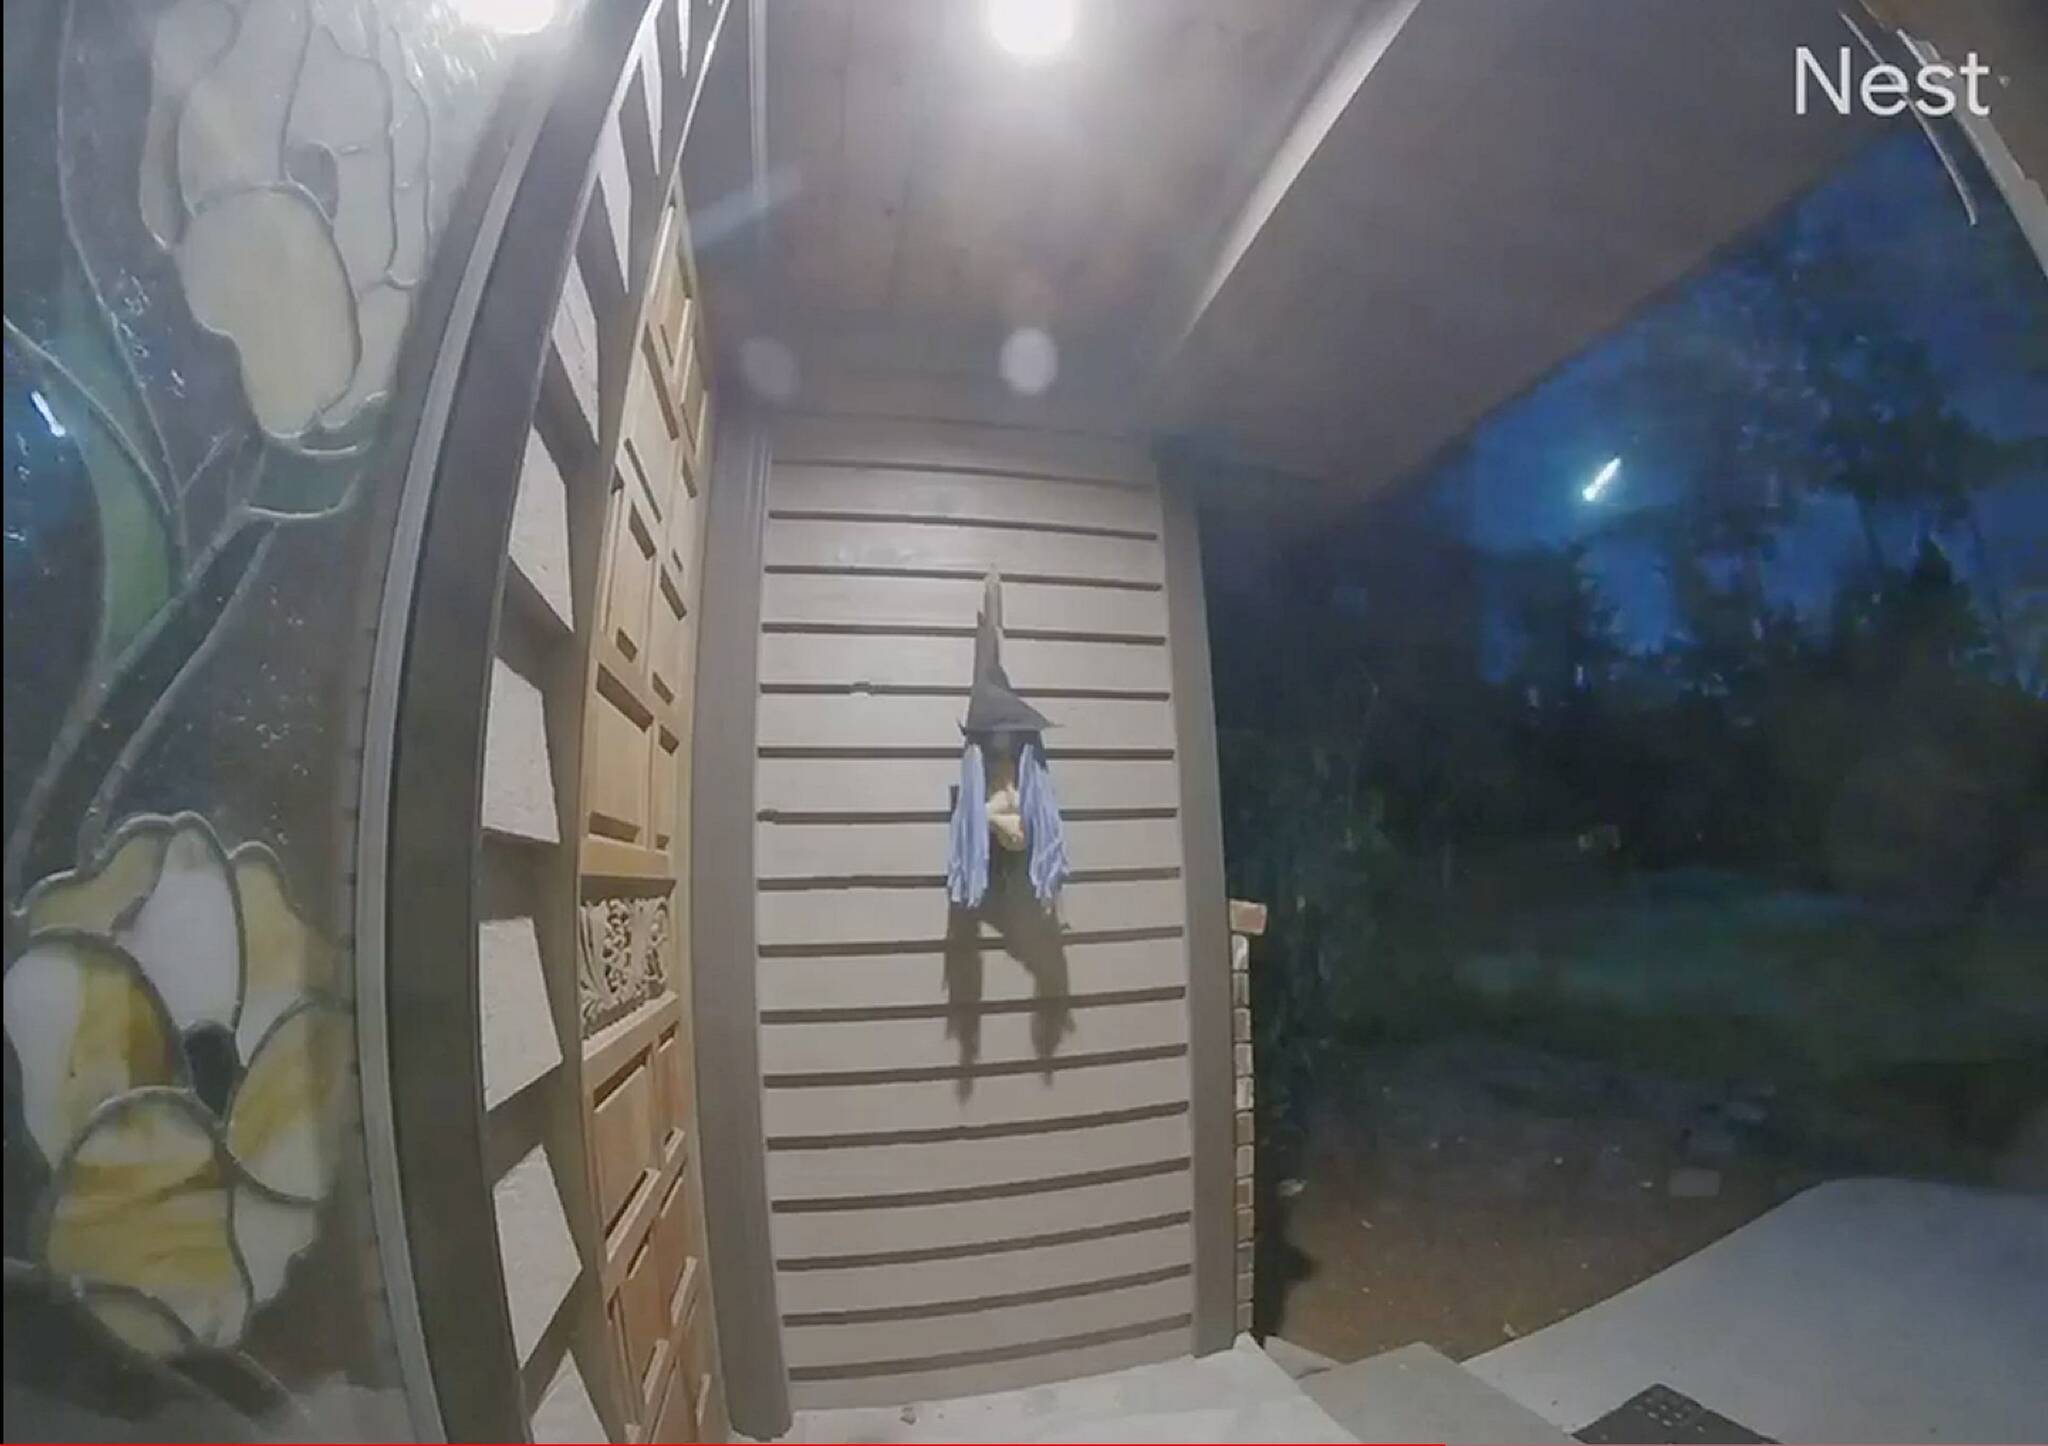 Image provided
Oak Harbor resident Sarah Peace caught the meteor that lit up the sky on her front door’s security camera.